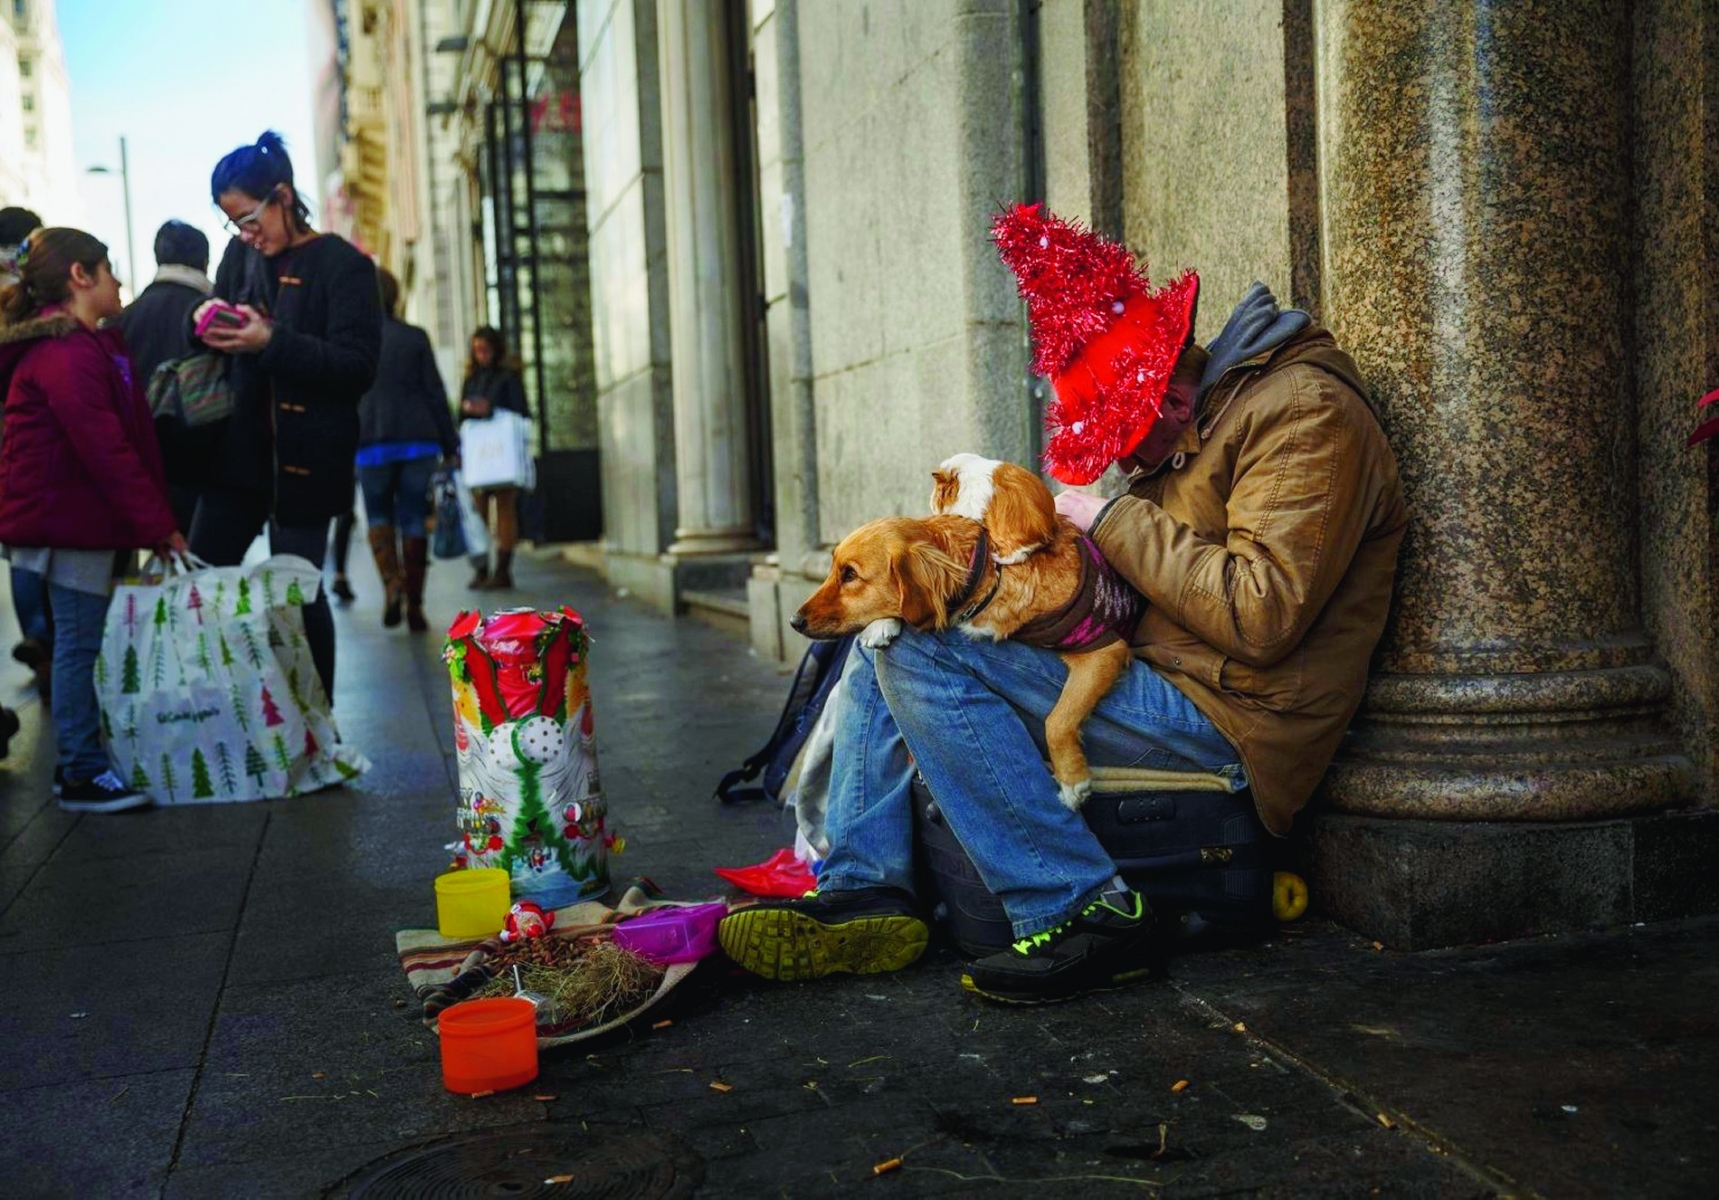 A man sleeps while begging with a dog and a Guinea pig on his knees in central Madrid, Wednesday, Dec. 9, 2015. (AP Photo/Daniel Ochoa de Olza) Spain Daily Life